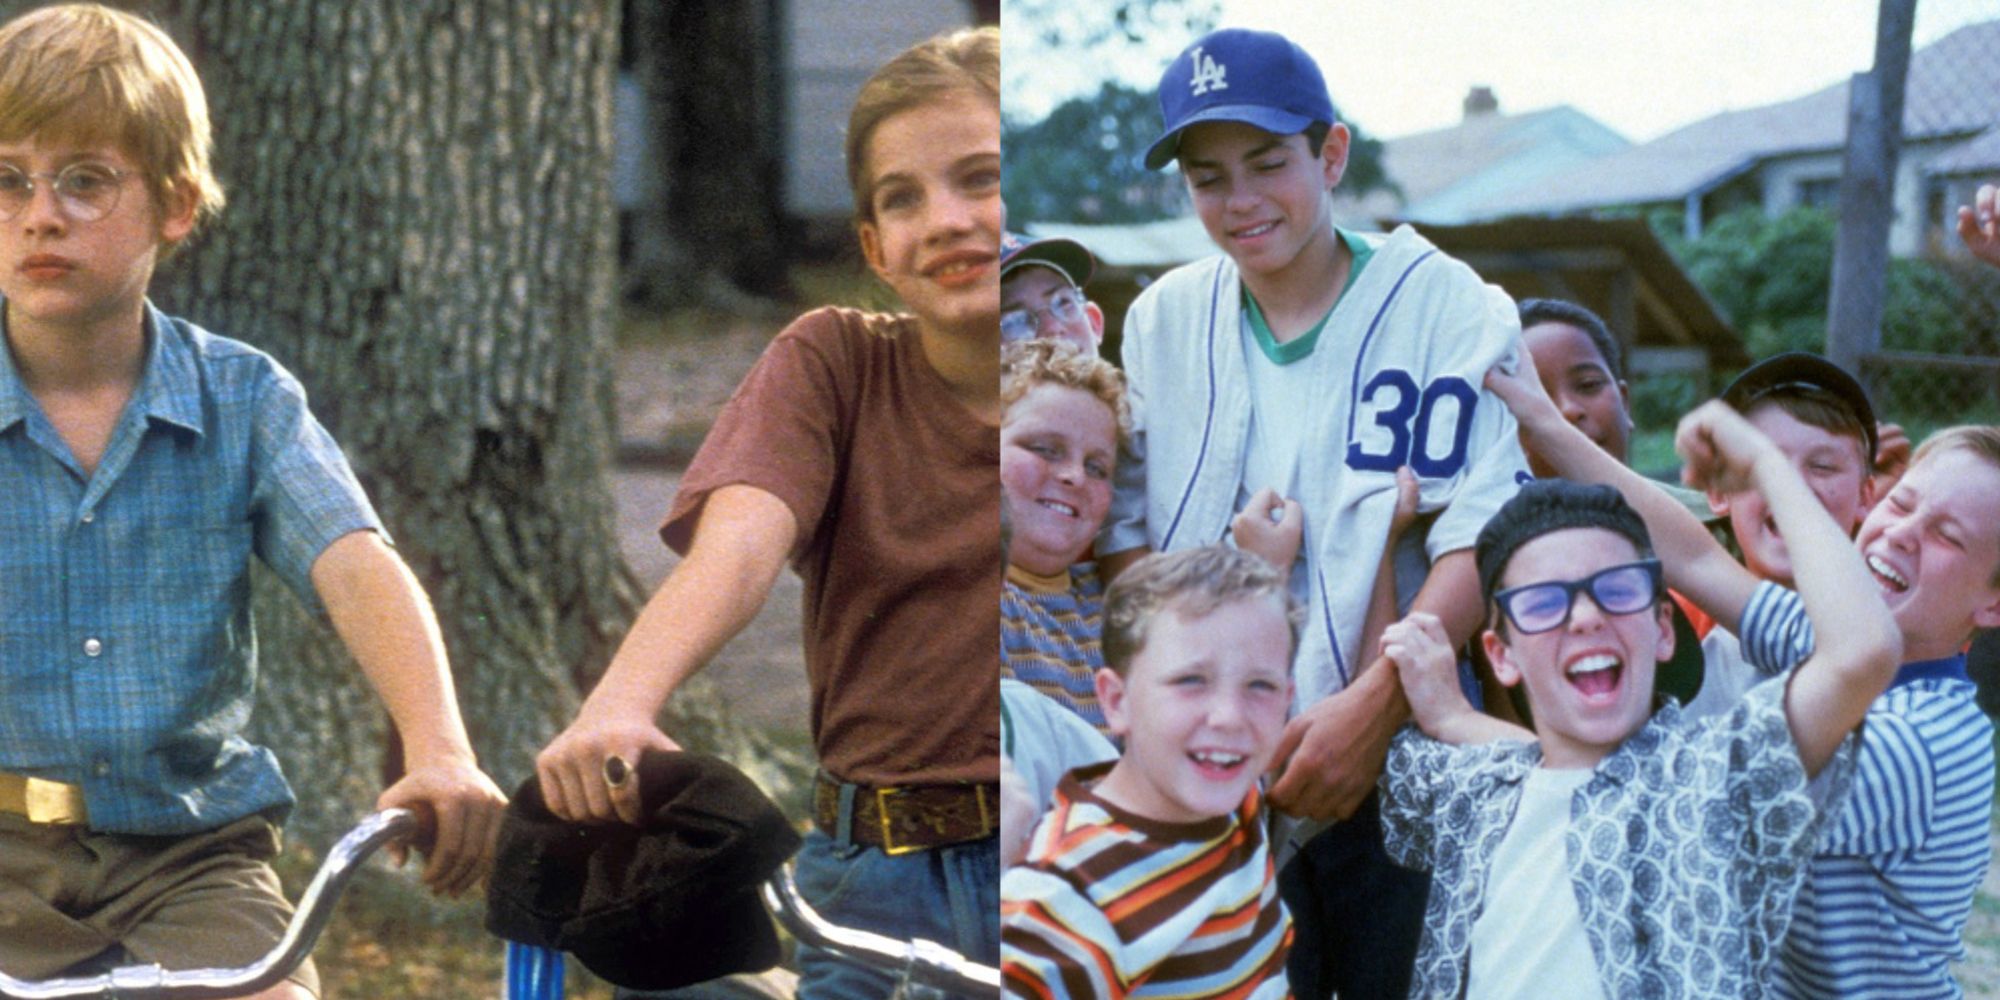 A collage of the movie My Girl and The Sandlot